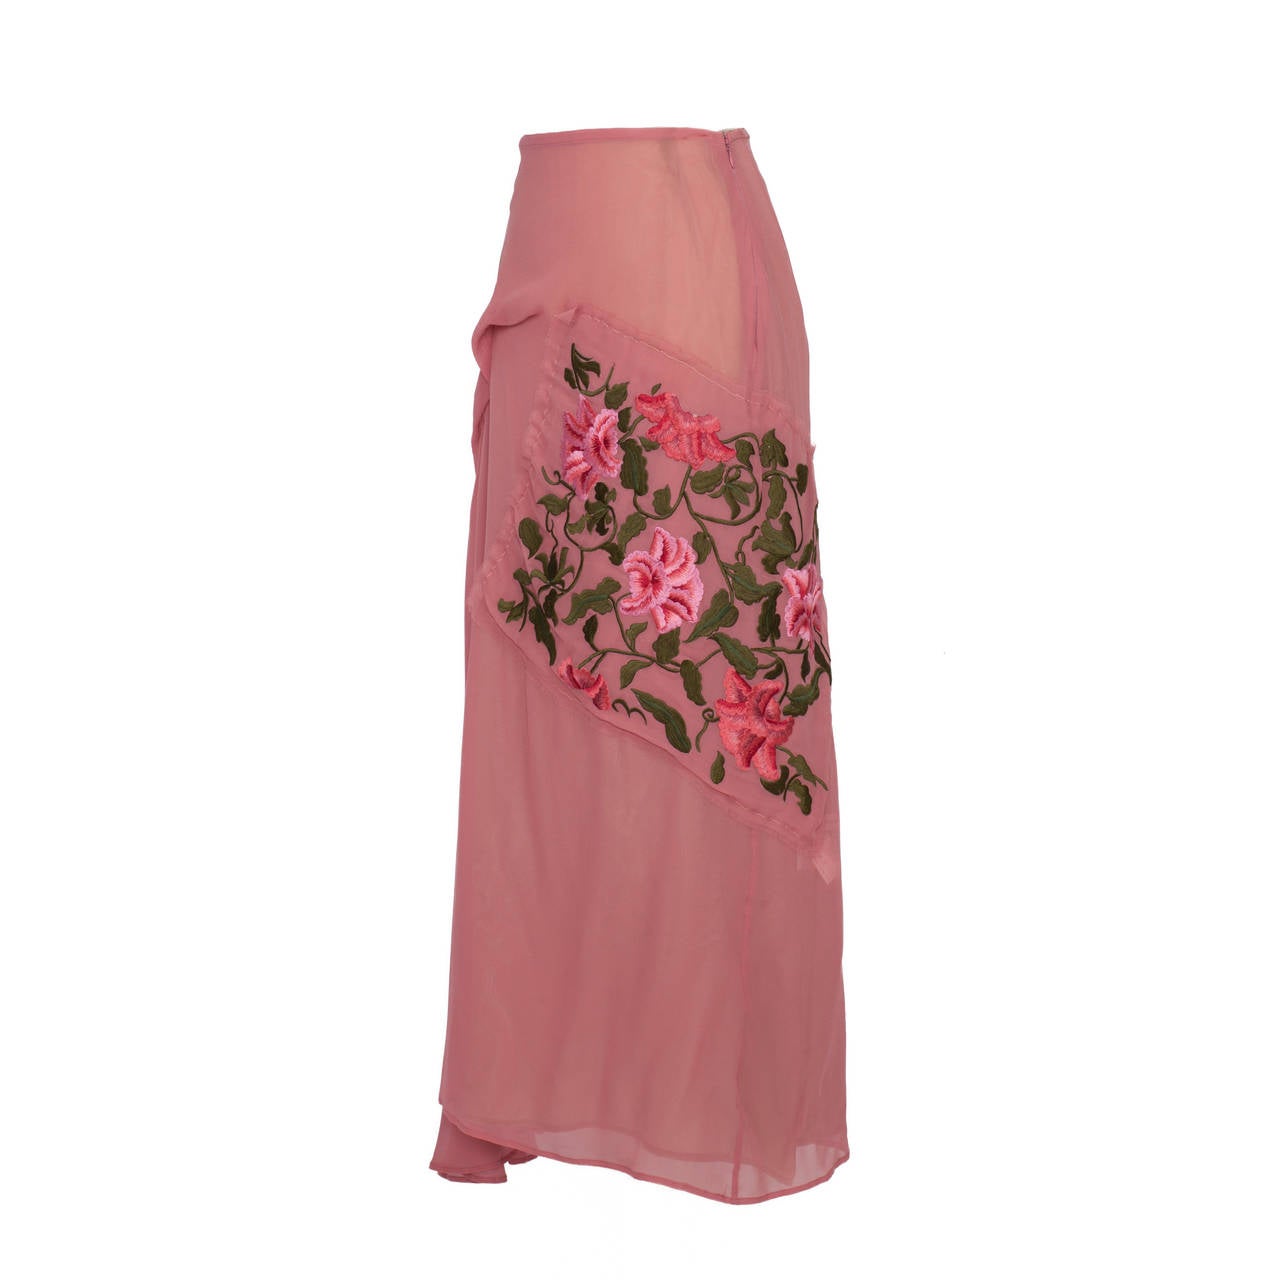 Yohji Yamamoto pink / beige asymmetric silk double layered skirt. 
Draping front detail with amazing embroidered flower square patch.